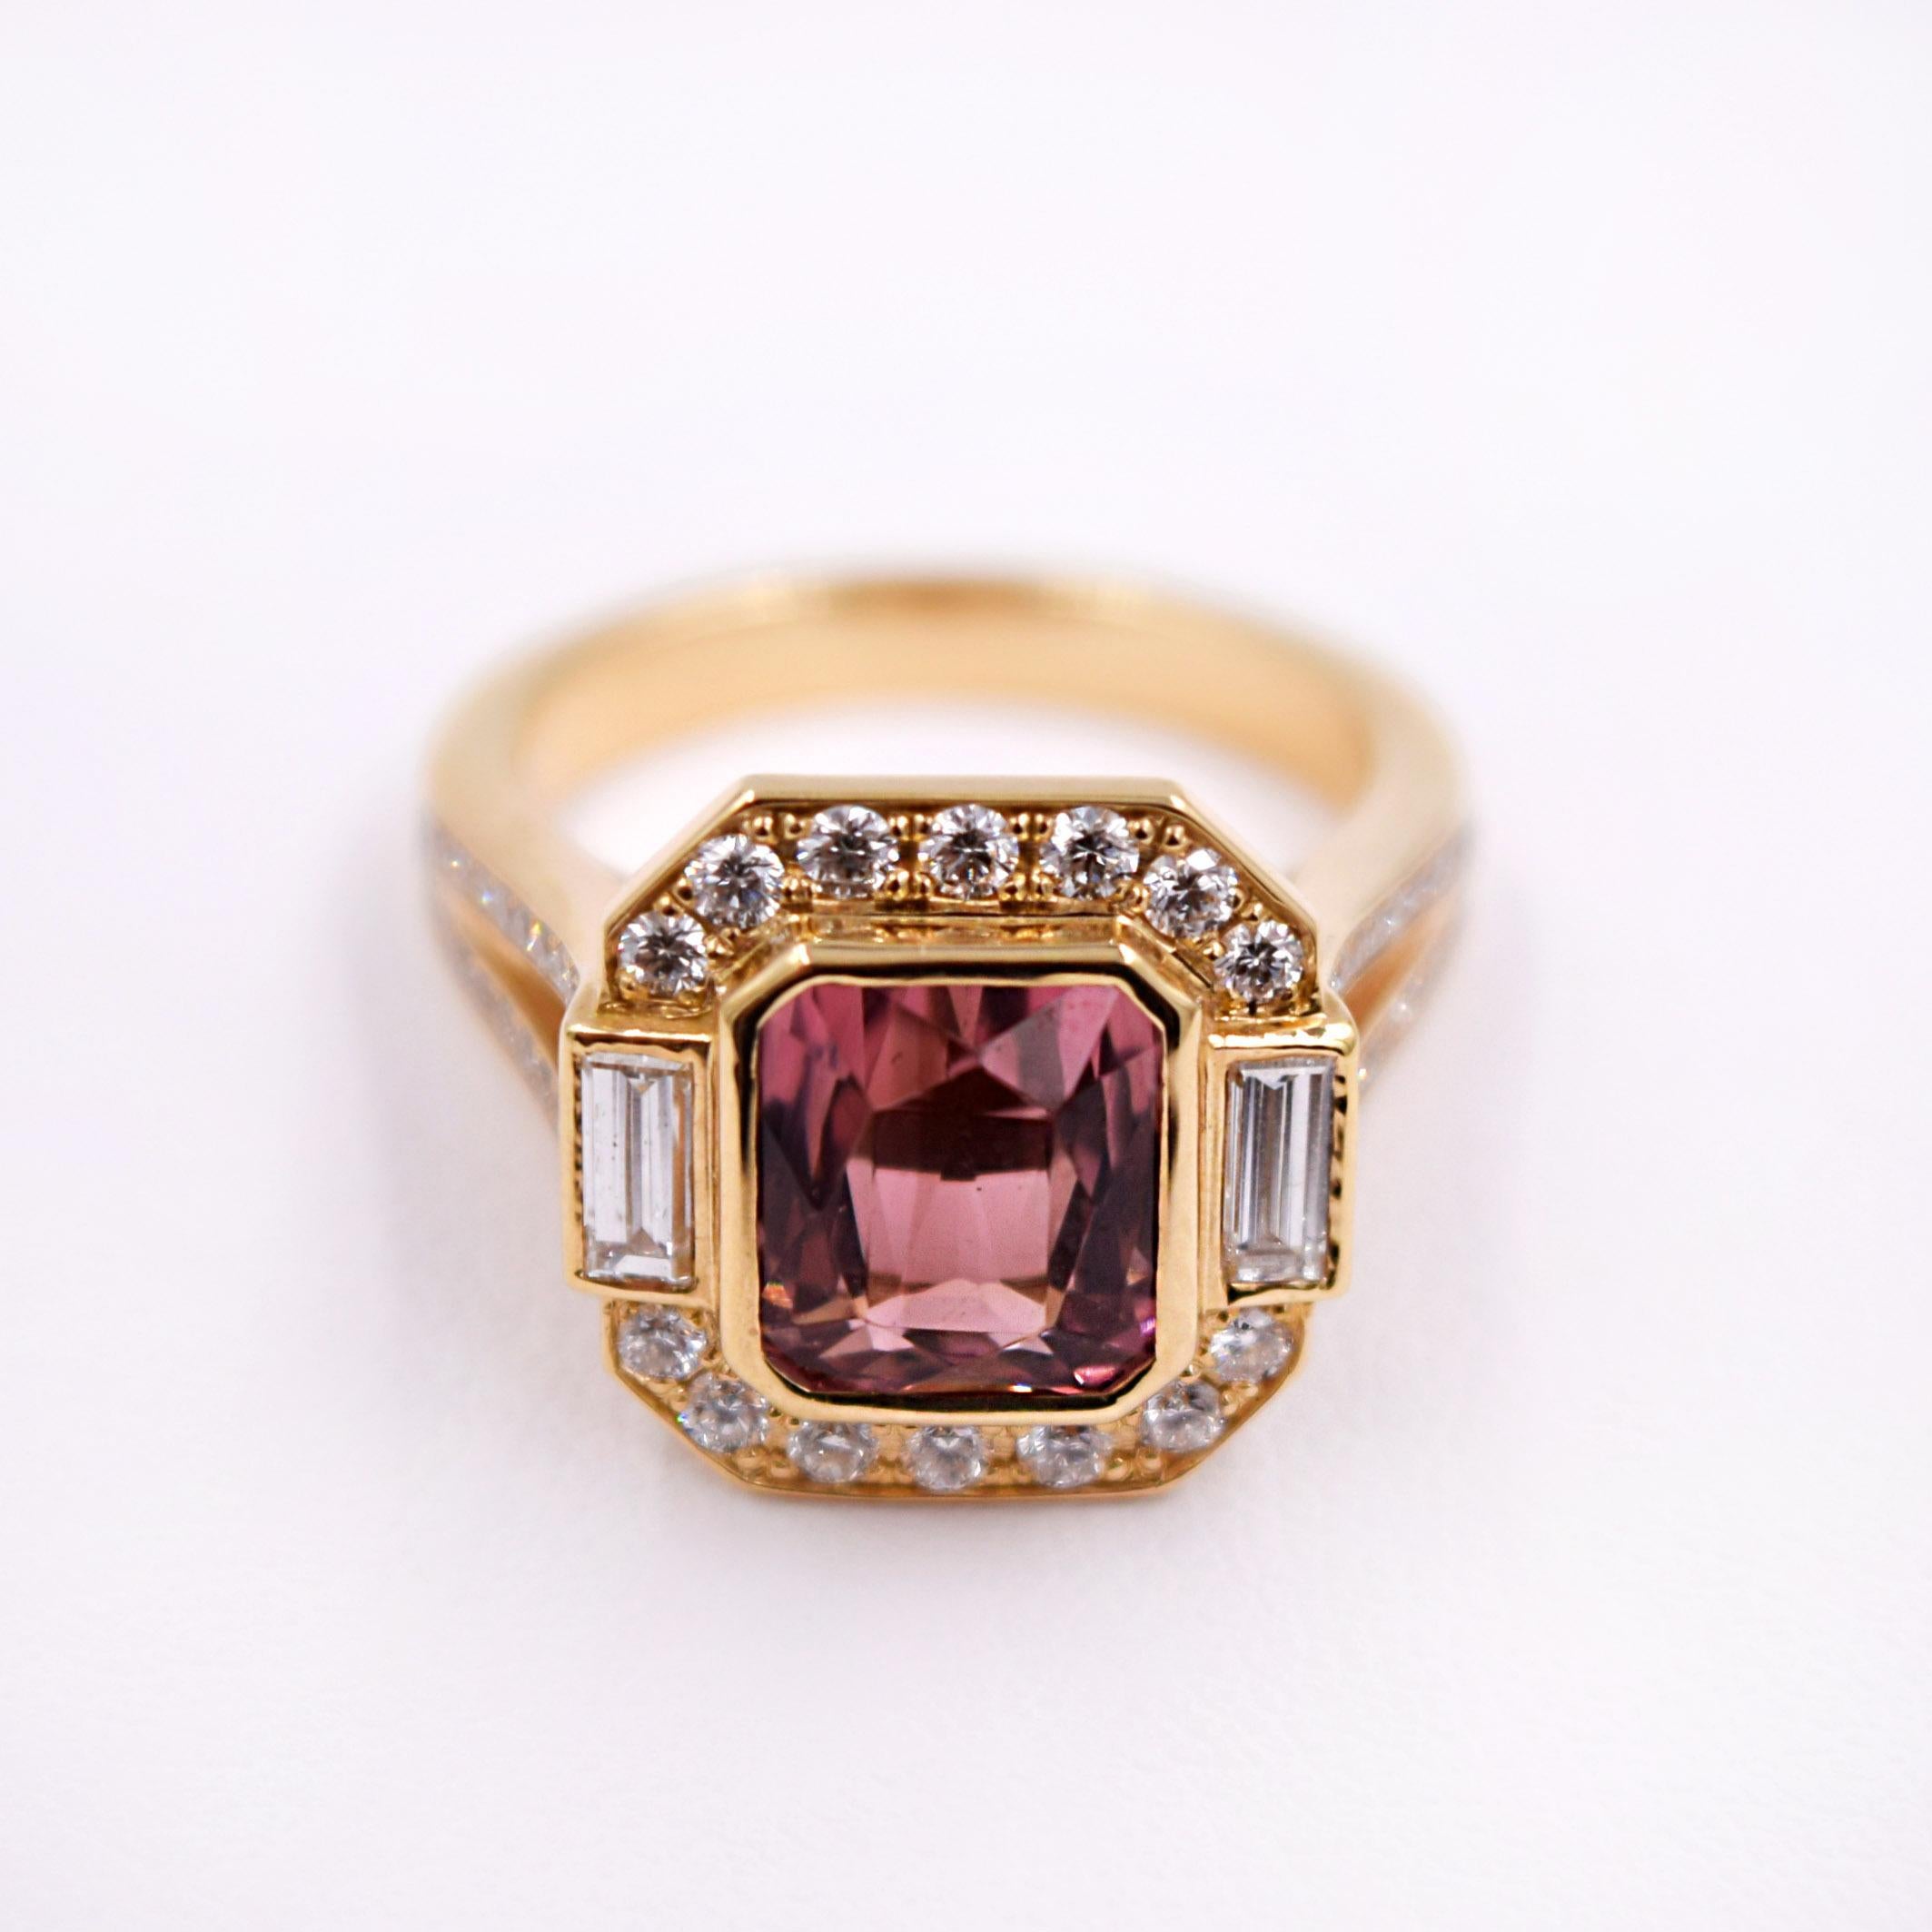 - Designed by Carl Priolo
- Cushion Cut Pink Tourmaline 3.34 Carat
- 0.79 Carats of White Diamonds
- 18K Yellow Gold
- Size 6.5 and can be sized